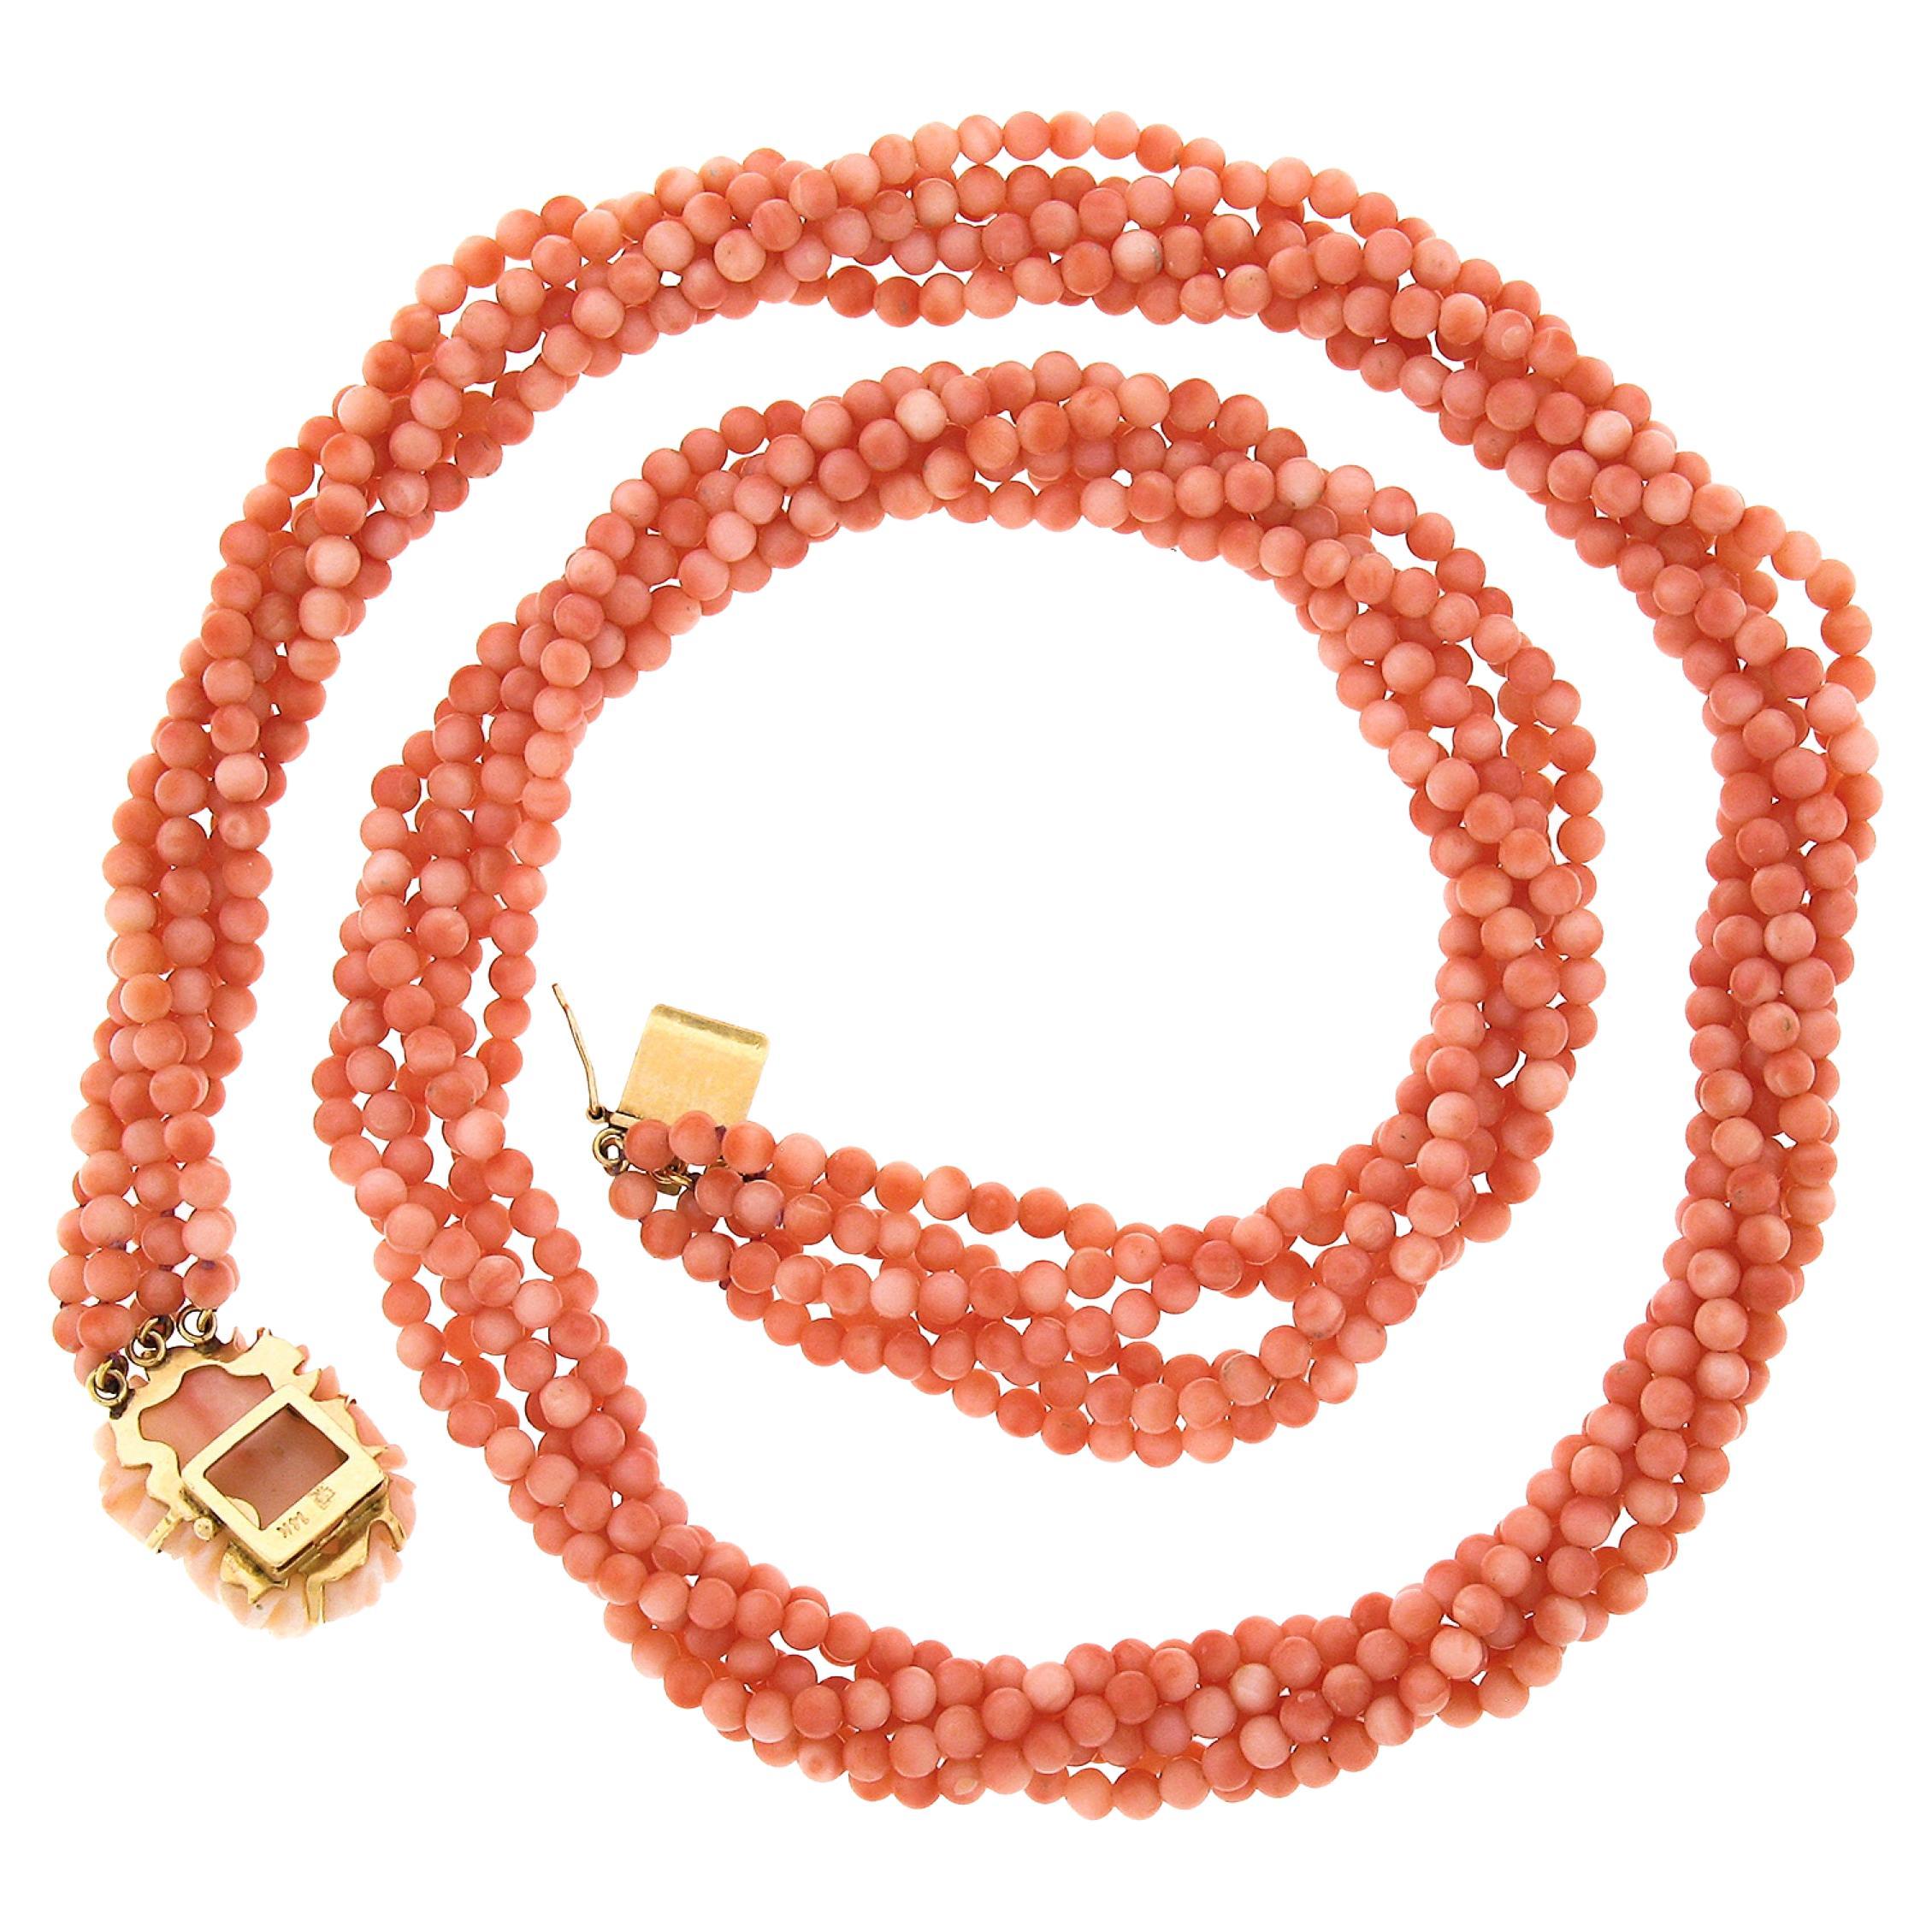 This gorgeous multi-strand coral torsade necklace features 6 strands tied together by a 14k yellow gold box clasp. The Corals are round beads with variation of pink angel skin color. The top of the clasp also features a gorgeous carved flower coral